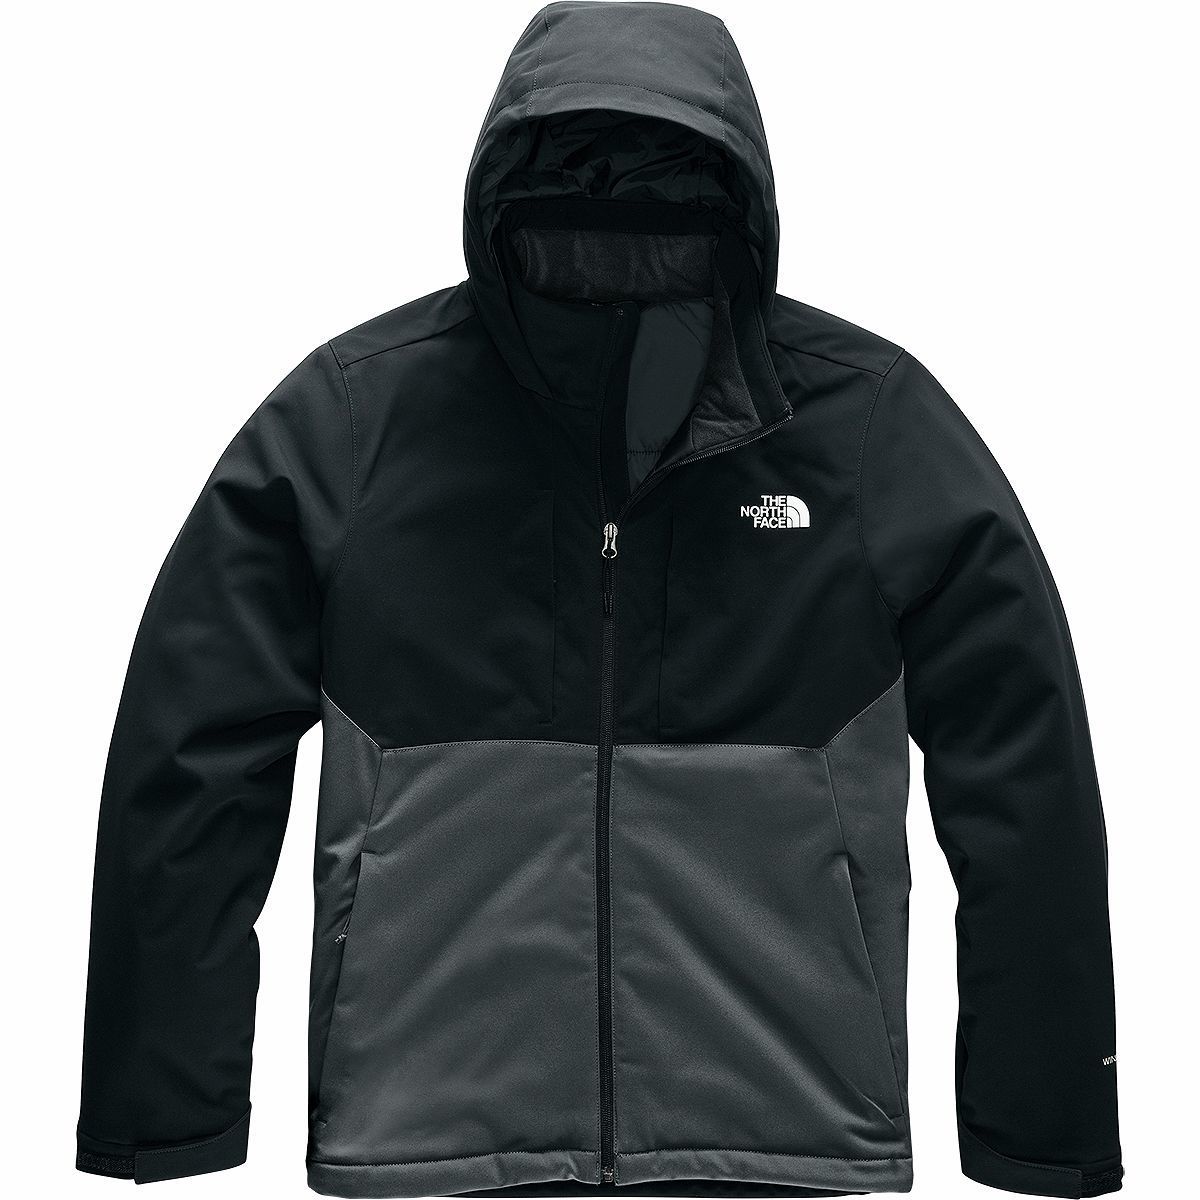 The North Face Men's Apex Elevation Insulated Softshell Jacket